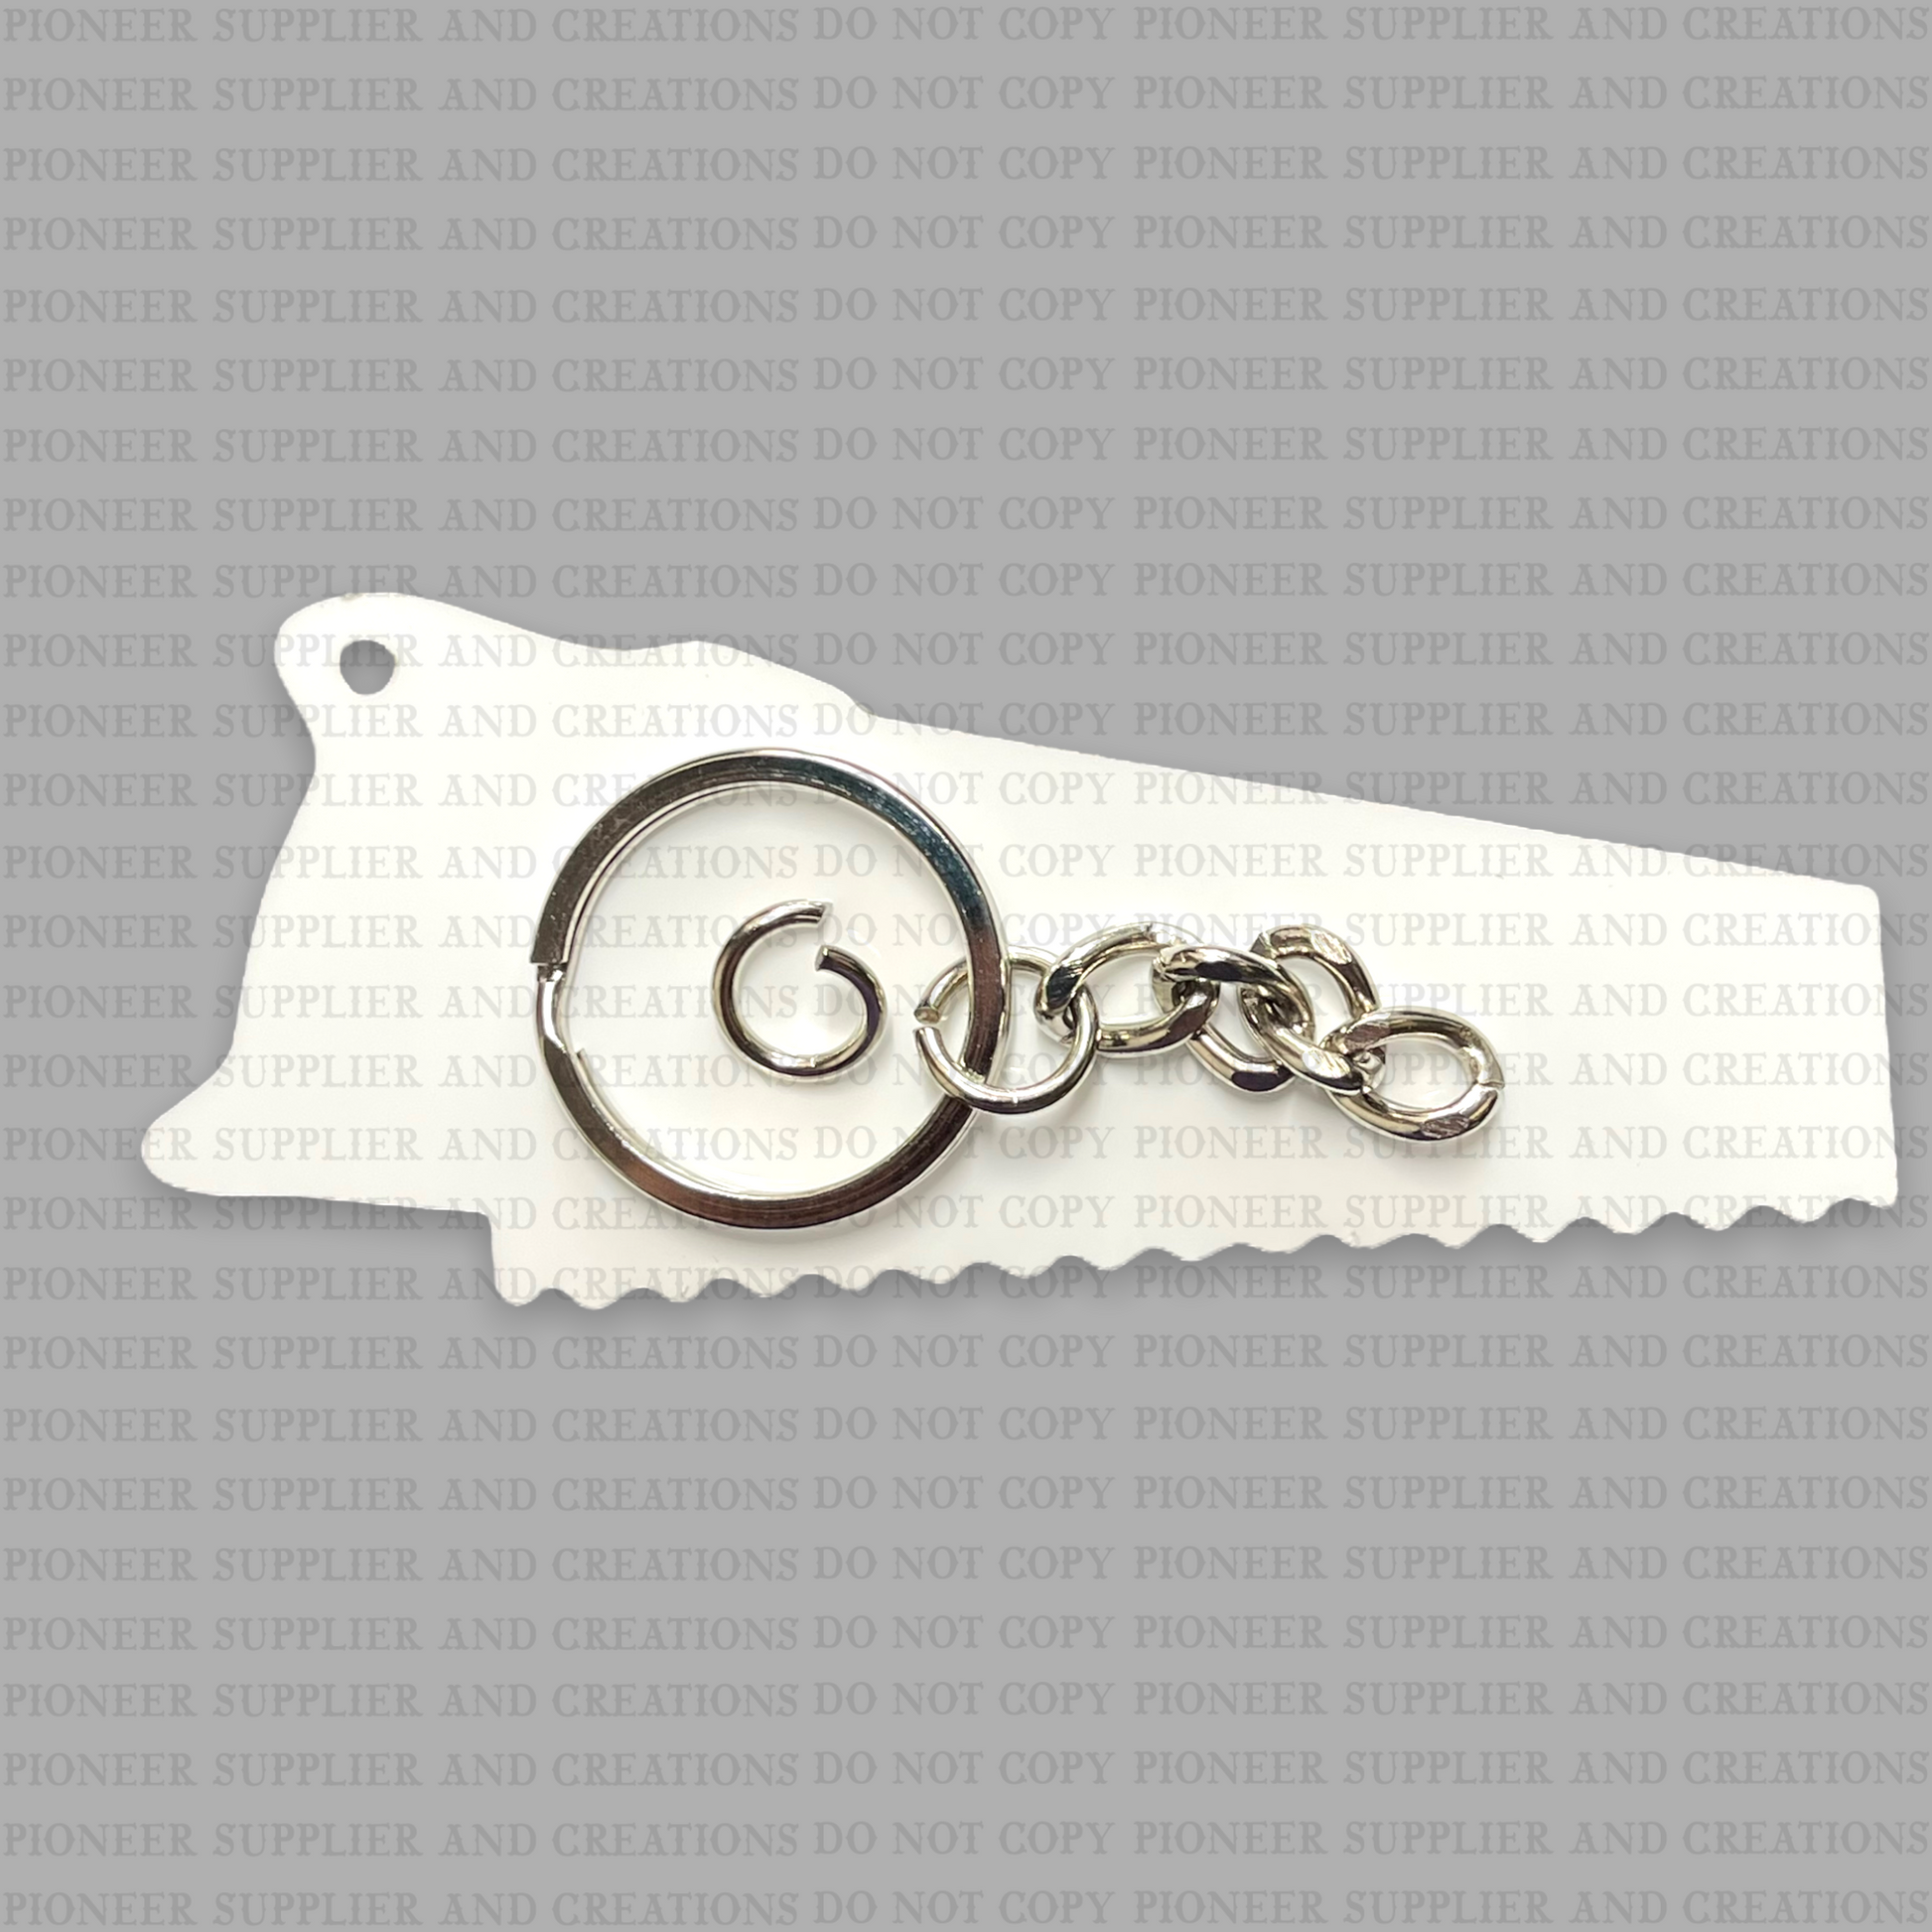 Hand Saw Shaped Keychain Sublimation Blank - Pioneer Supplier & Creations